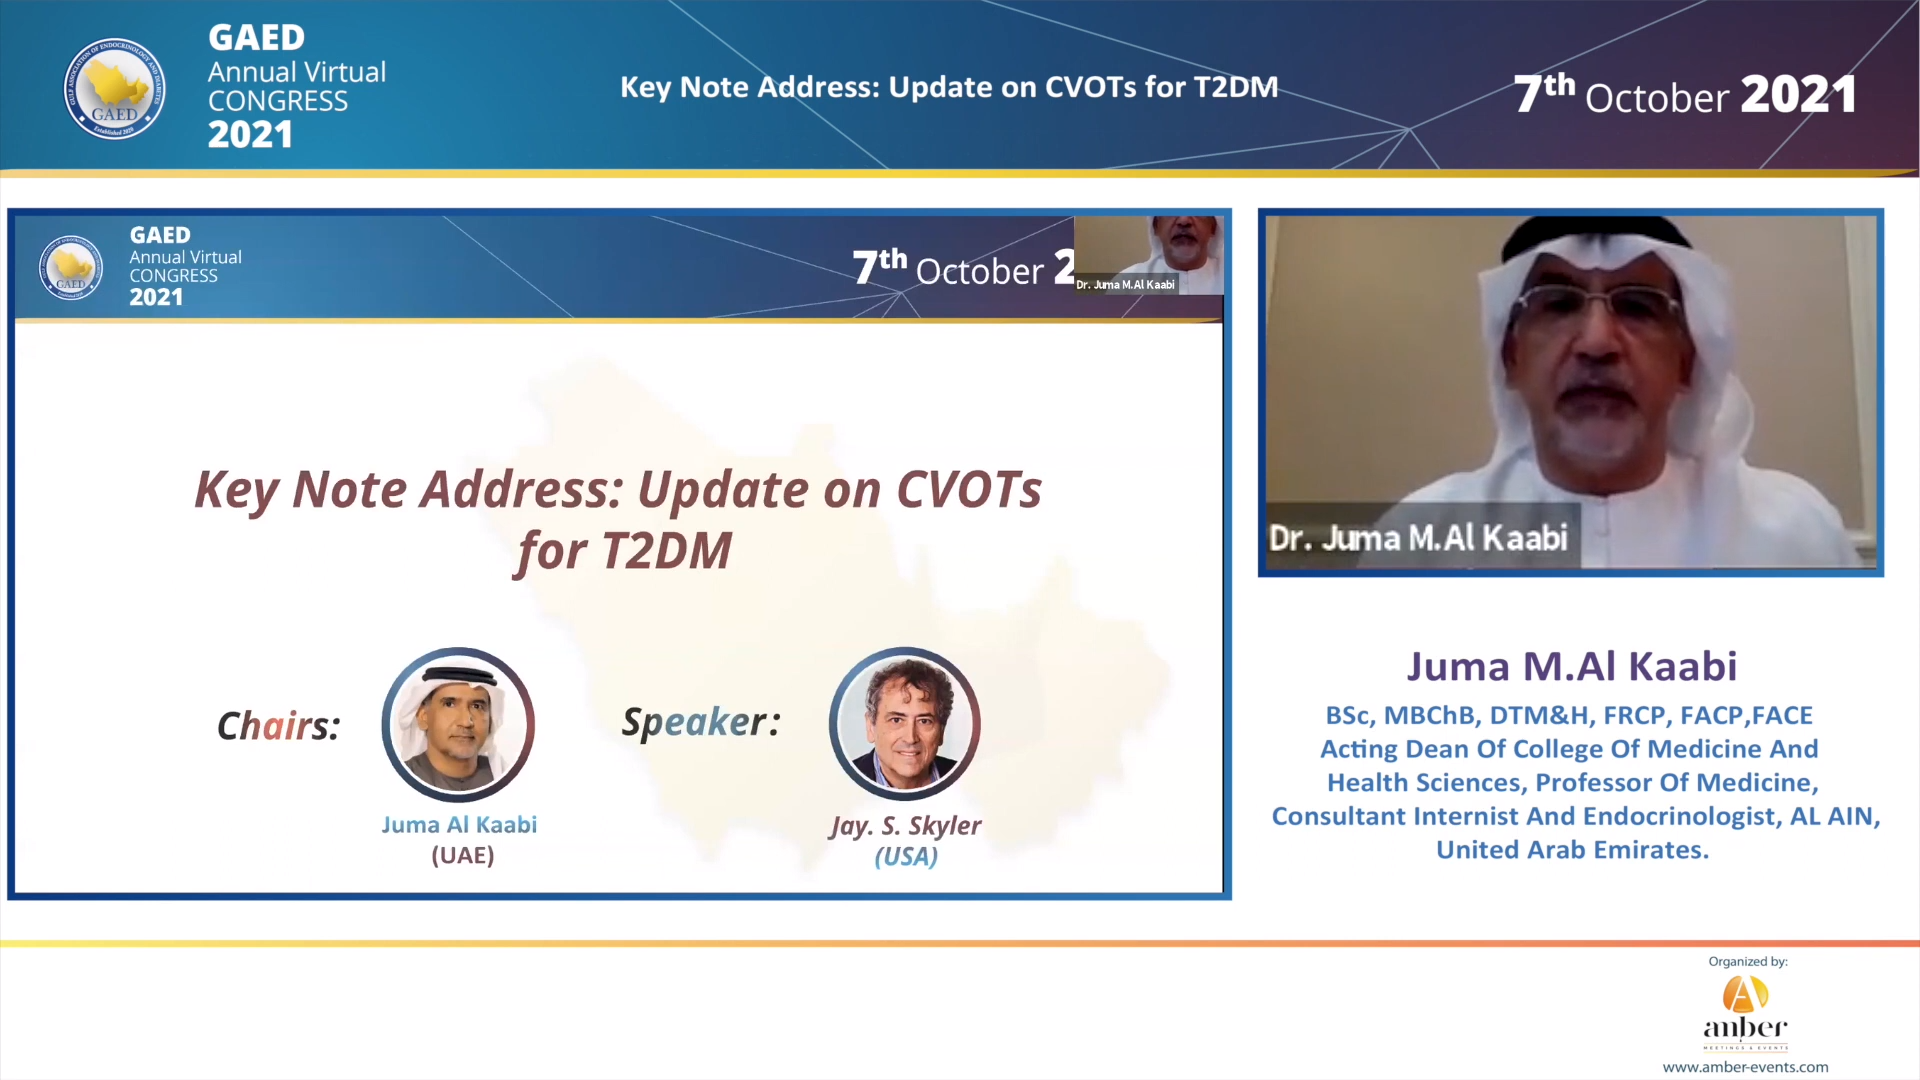 7.10.21 - Day 1, Key Note Address - Update on CVOTs for T2DM